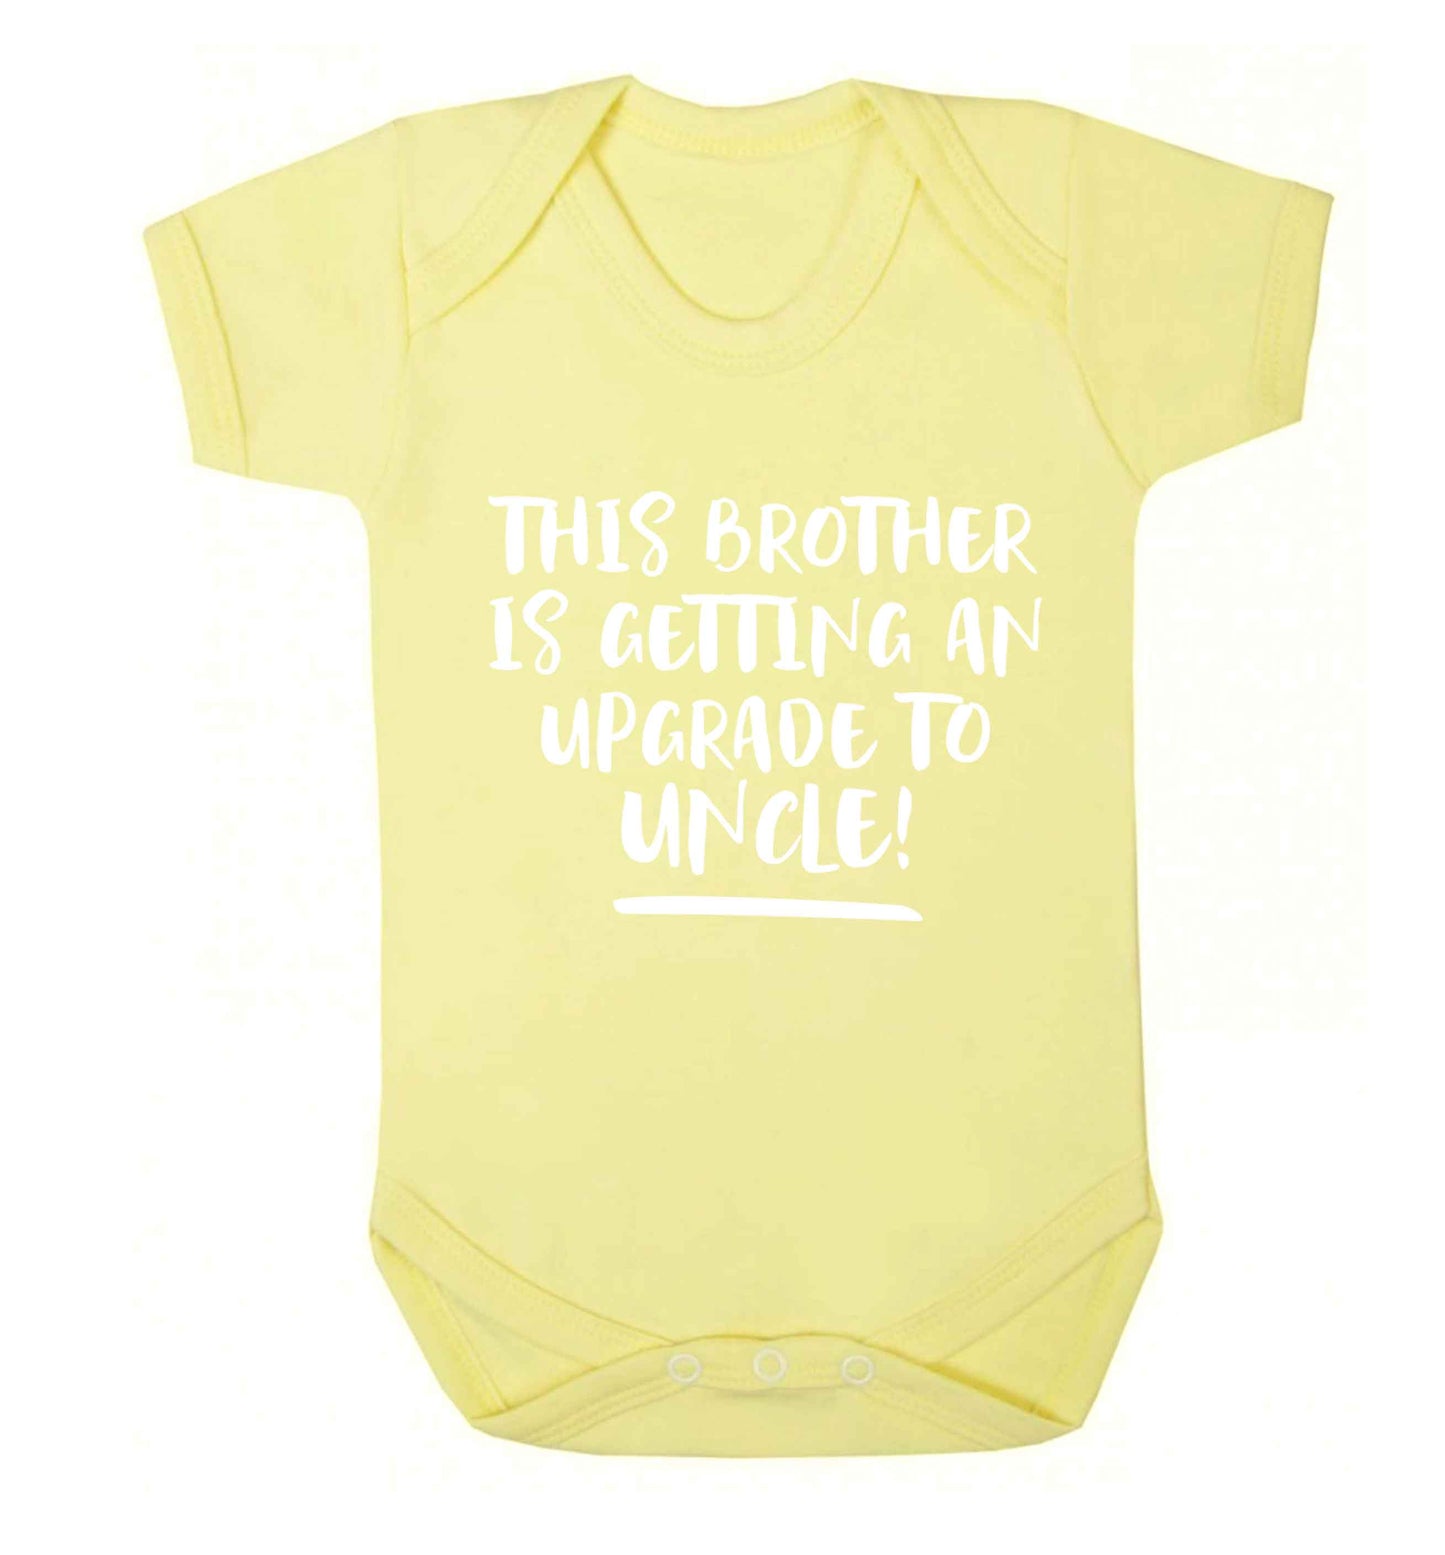 This brother is getting an upgrade to uncle! Baby Vest pale yellow 18-24 months